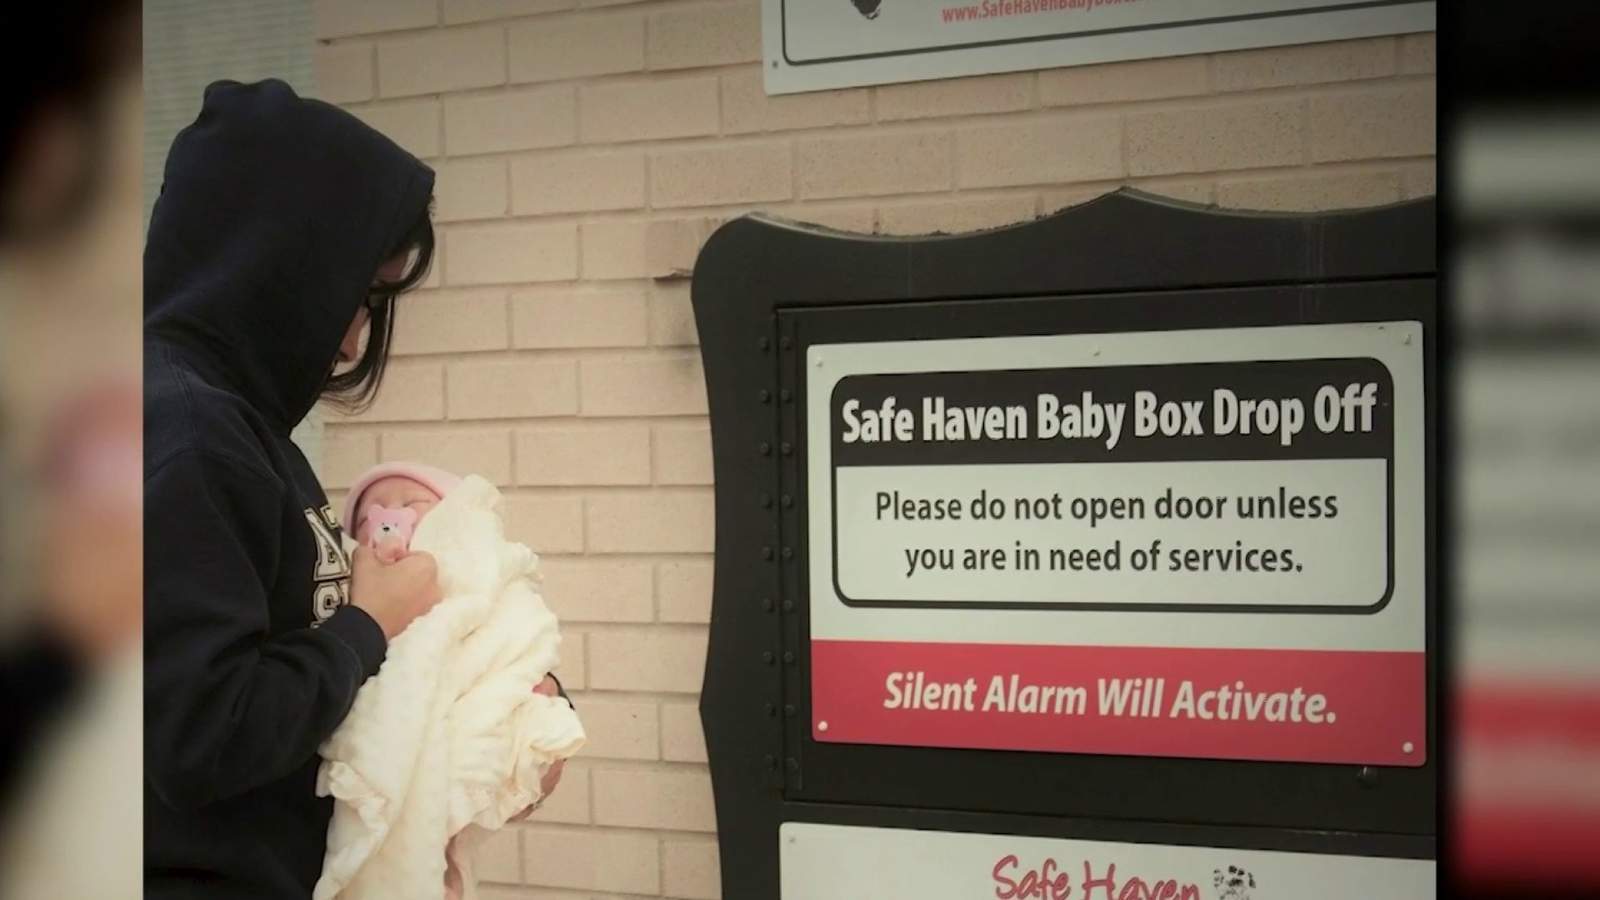 Ocala to install Florida’s first Safe Haven Baby Box